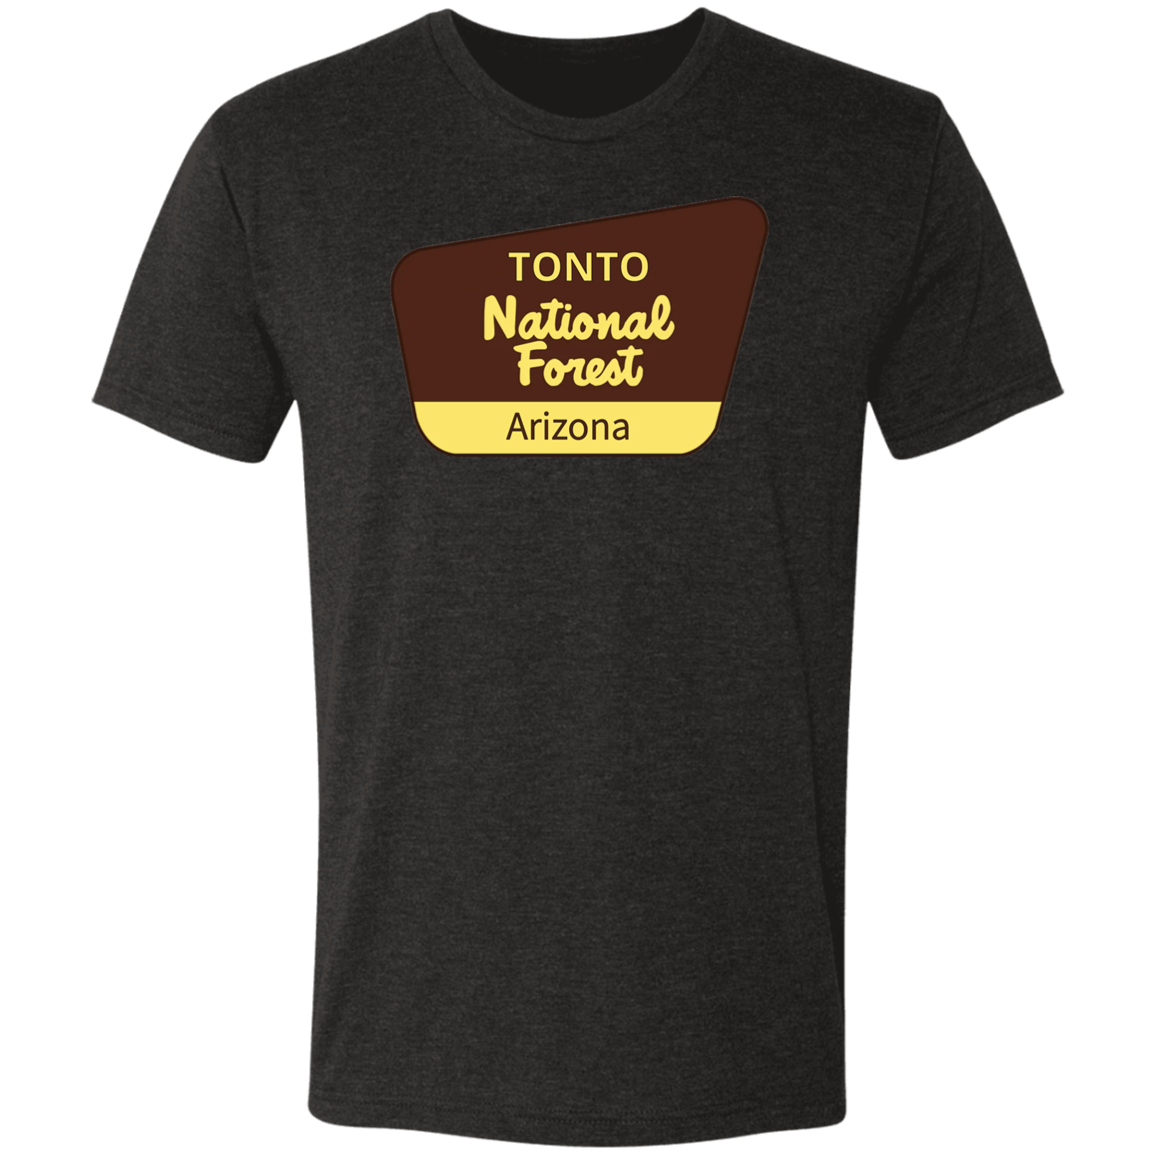 Arizona Trails Tonto National Forest - Premium Triblend National Forest T-Shirt